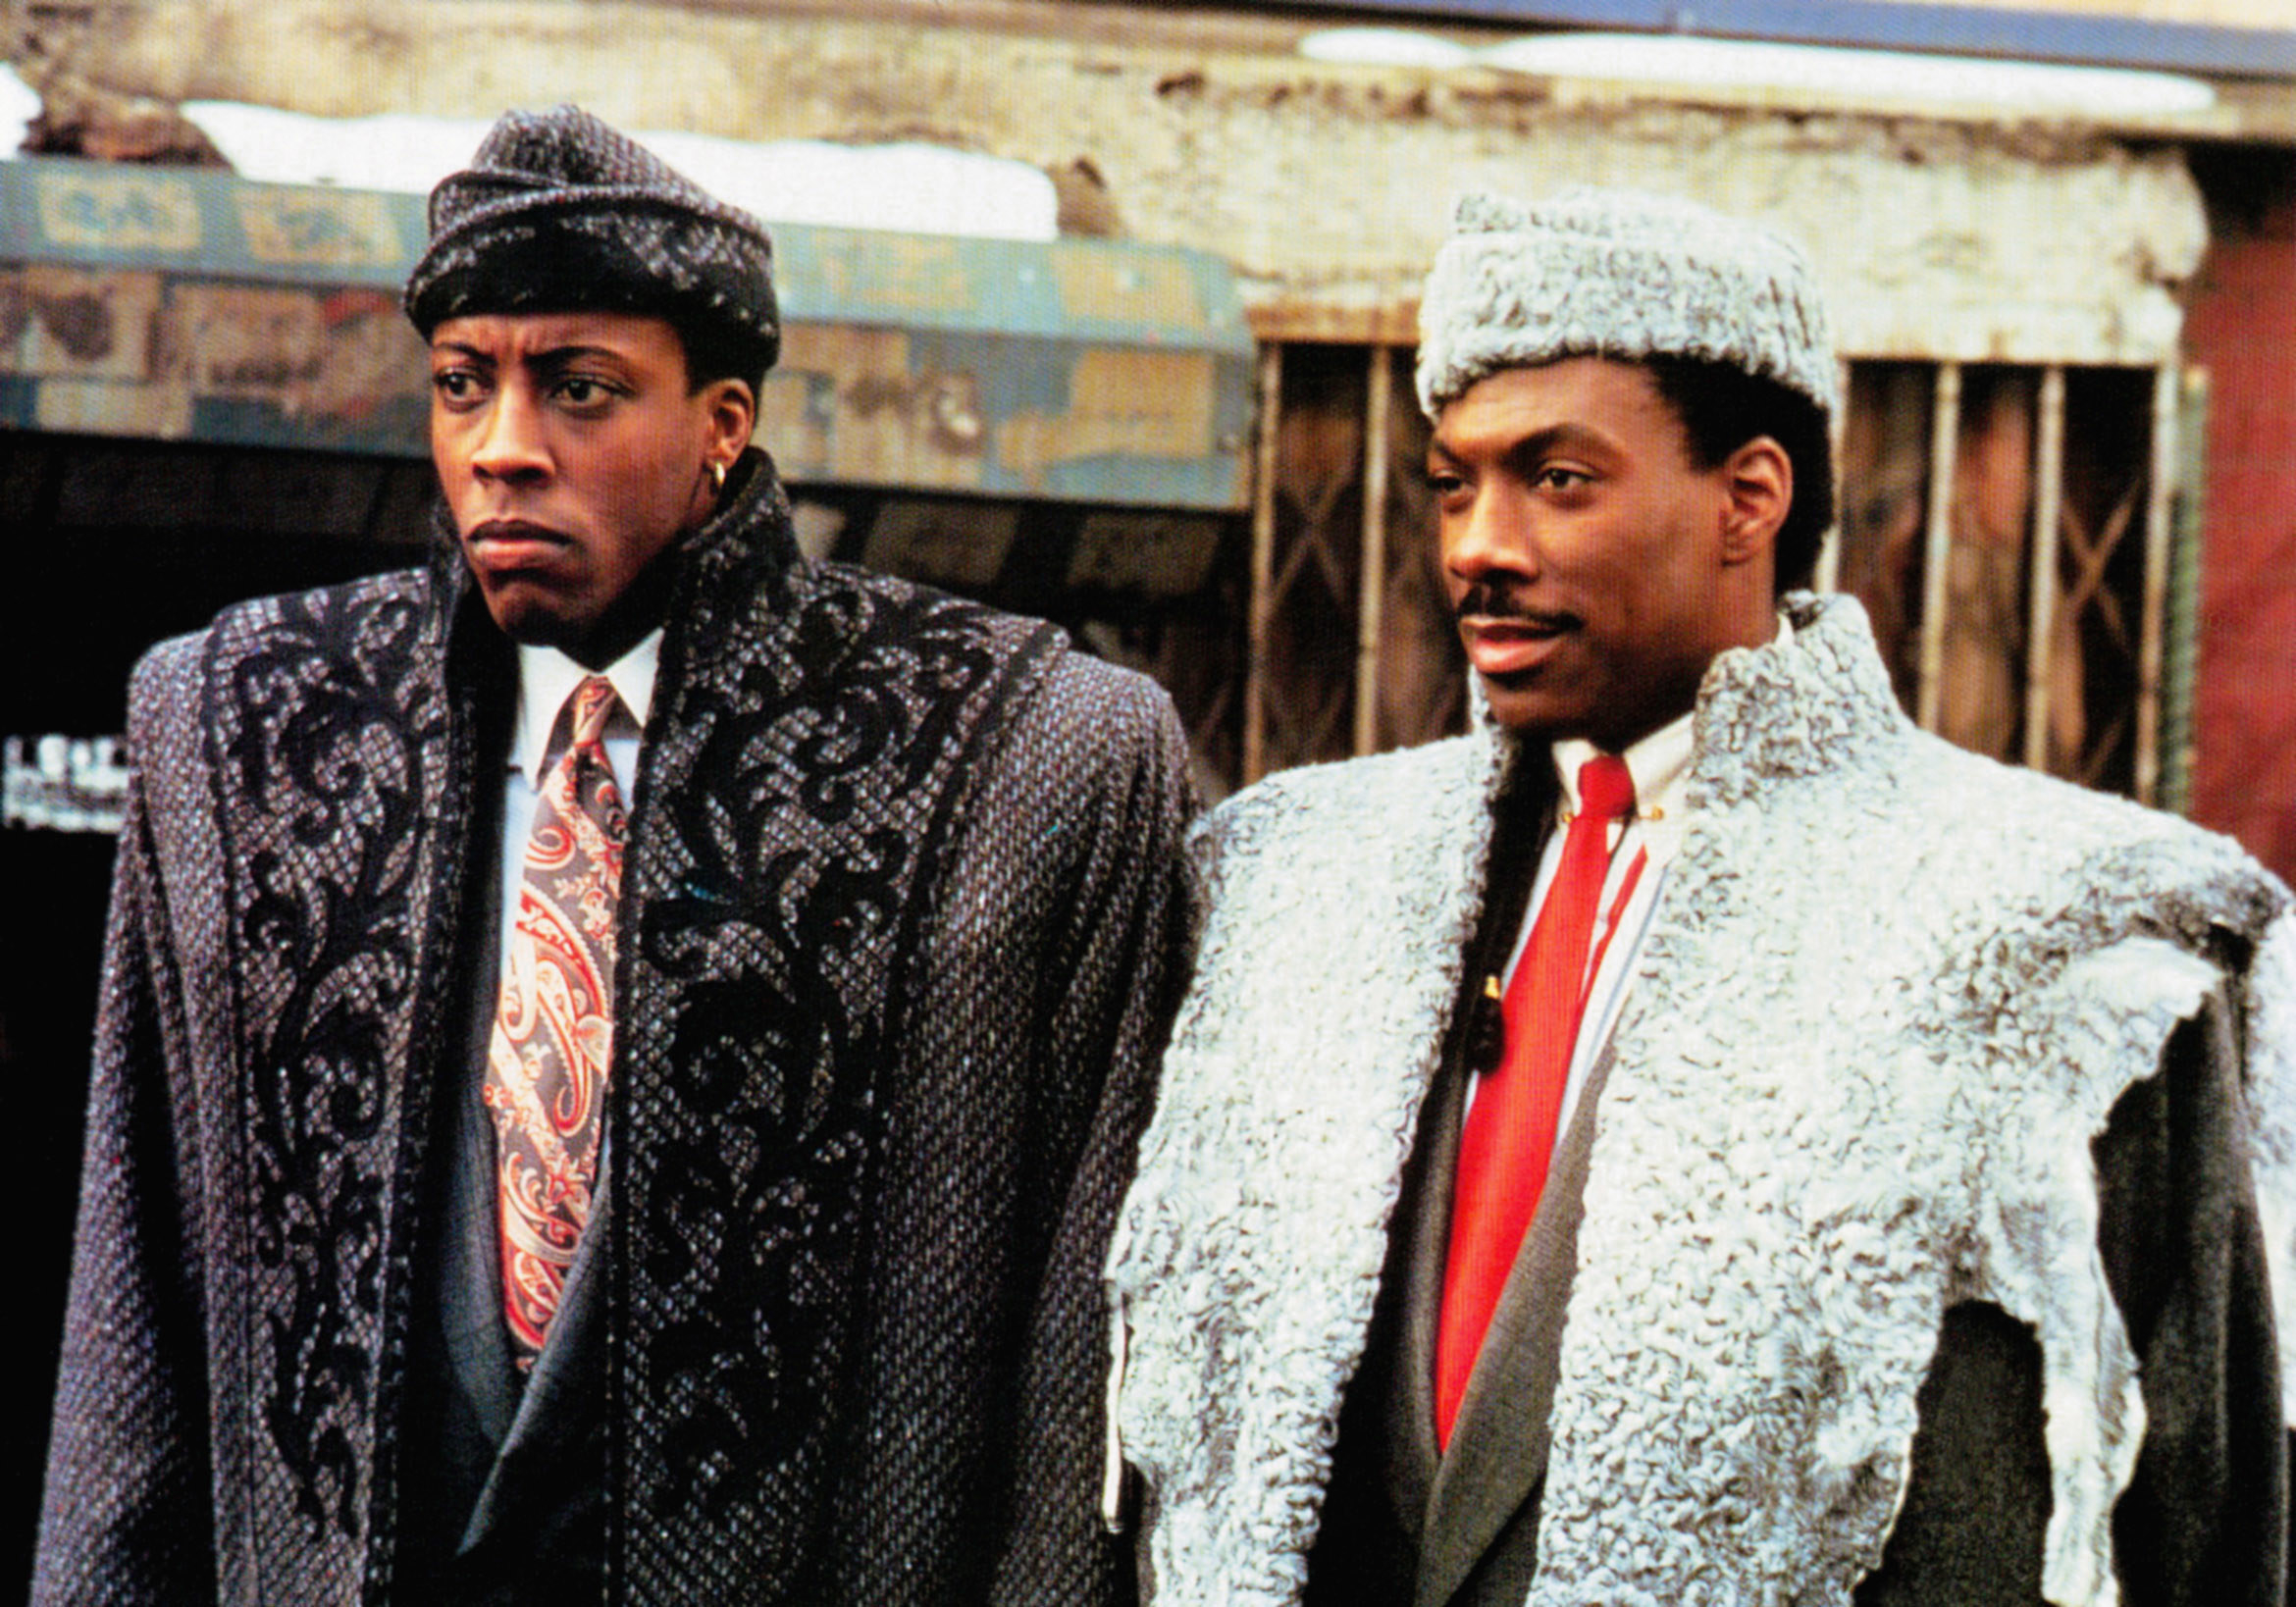 Arsenio Hall and Eddie Murphy in suits, coats, and hats